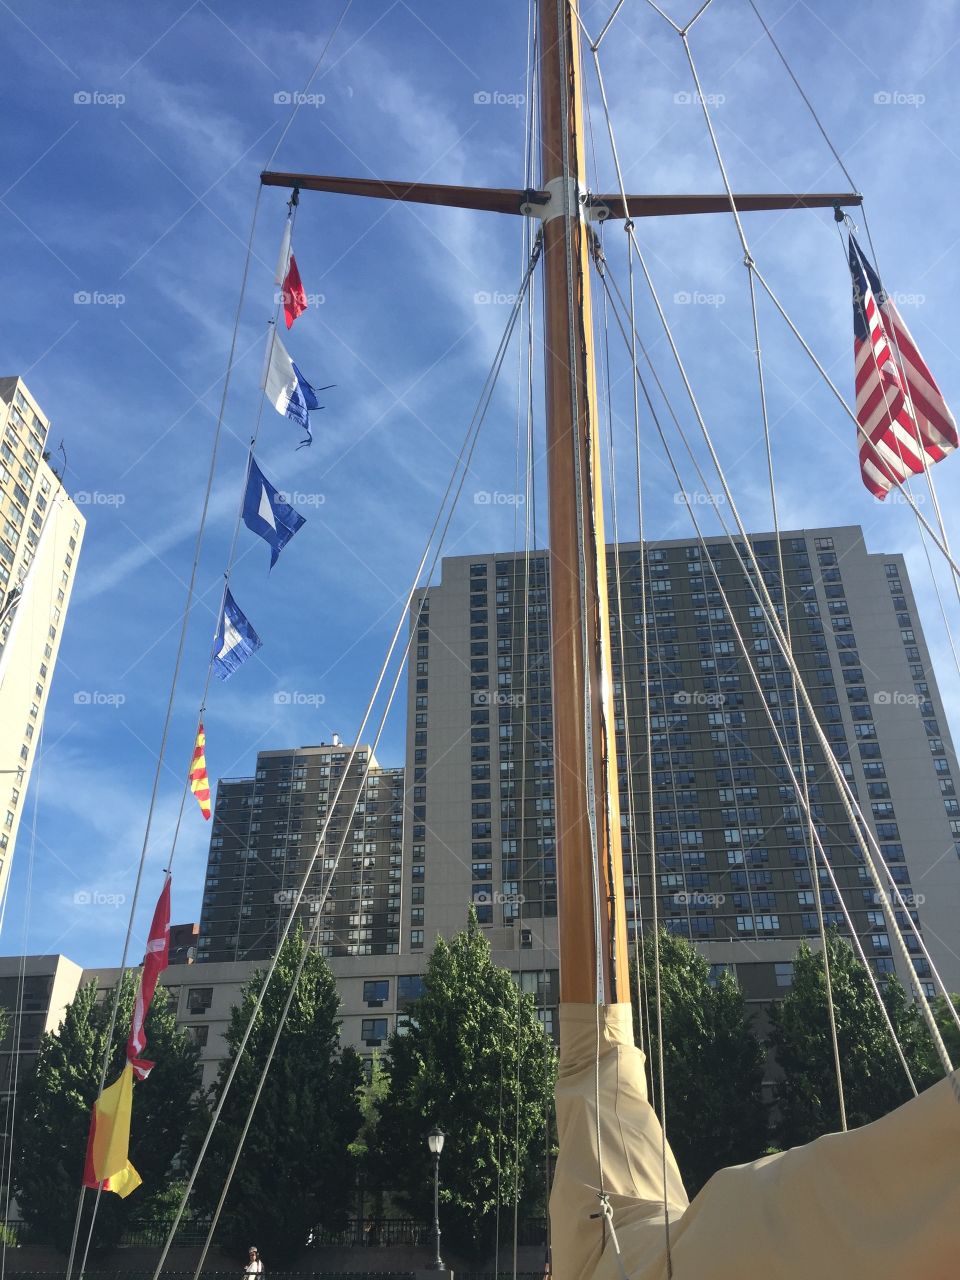 Nautical flags strung up on this boat docked in downtown NYC